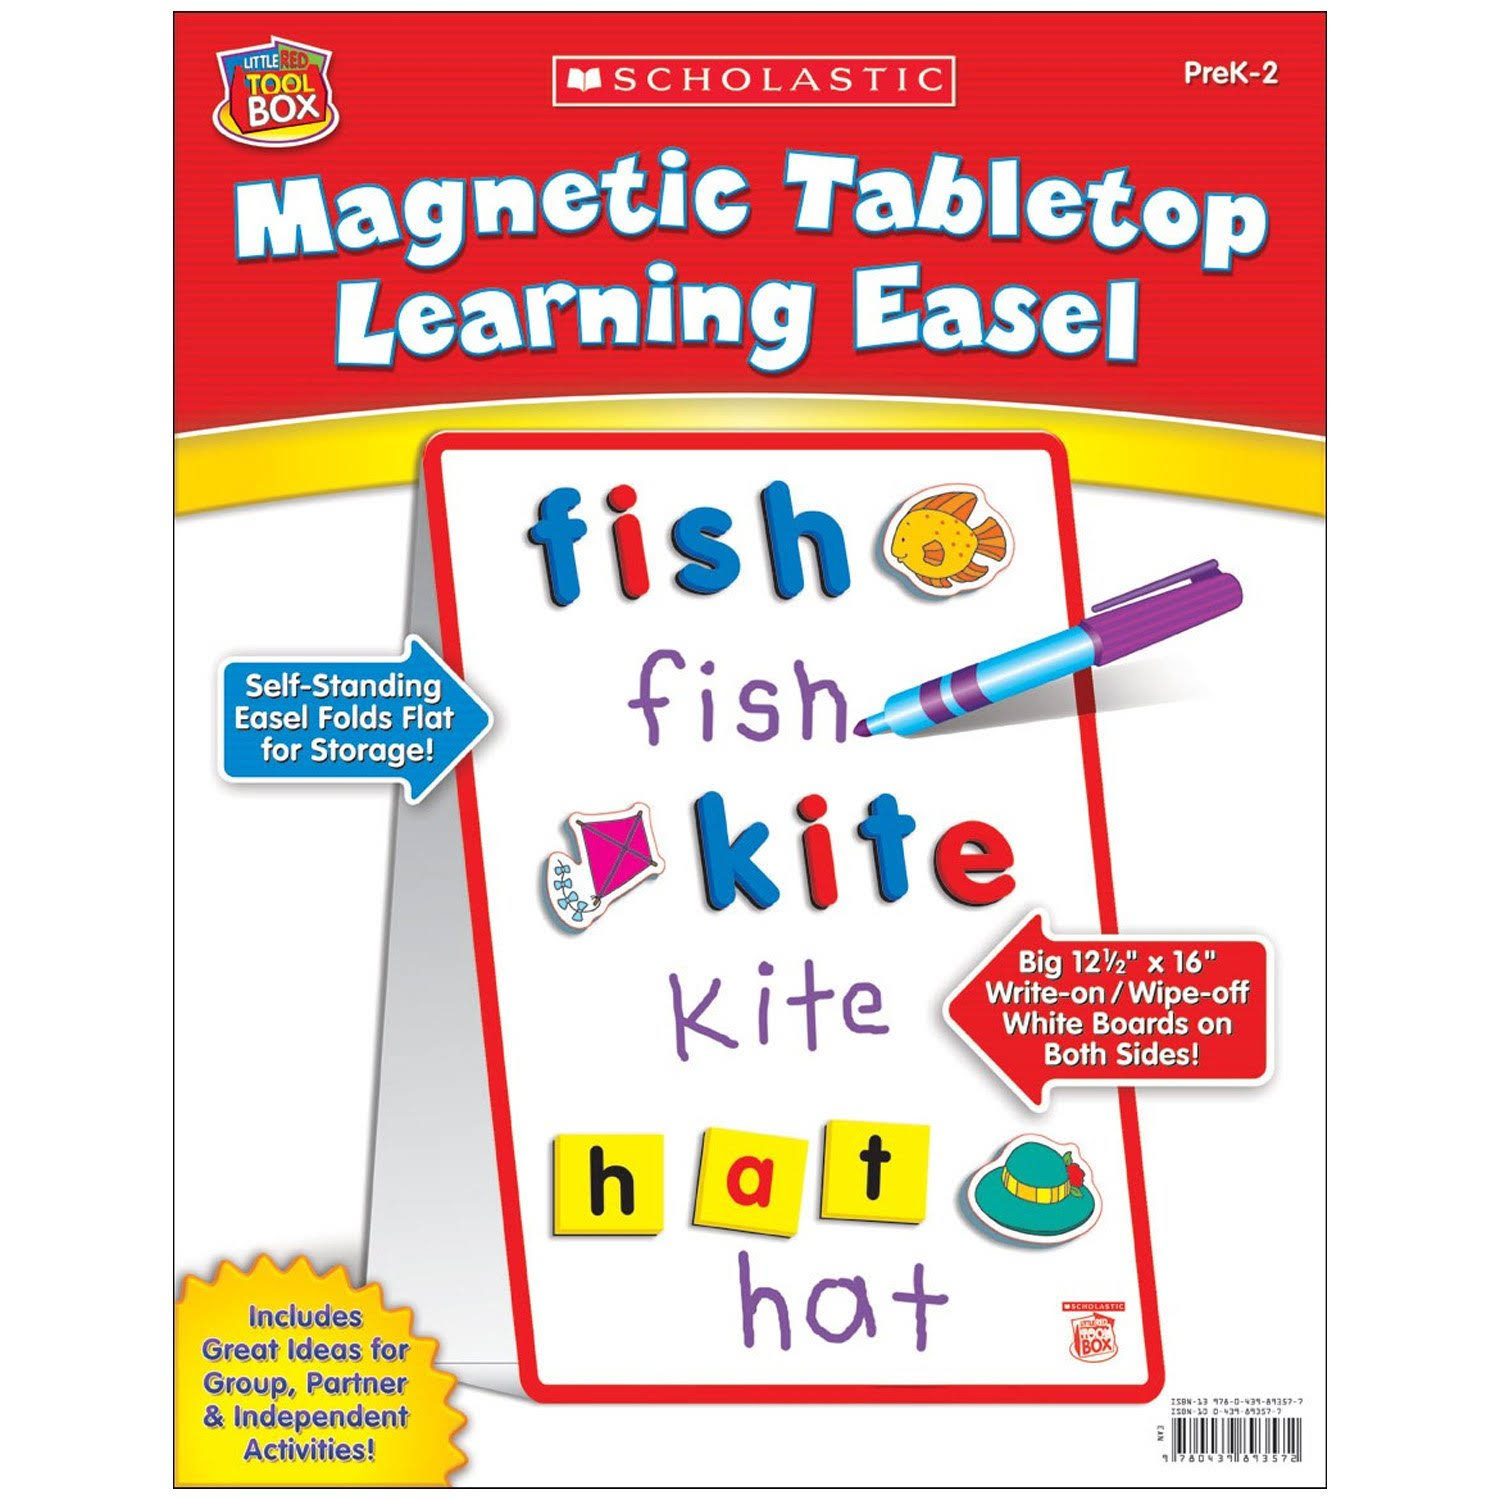 Little Red Tool Box: Magnetic Tabletop Learning Easel - Scholastic